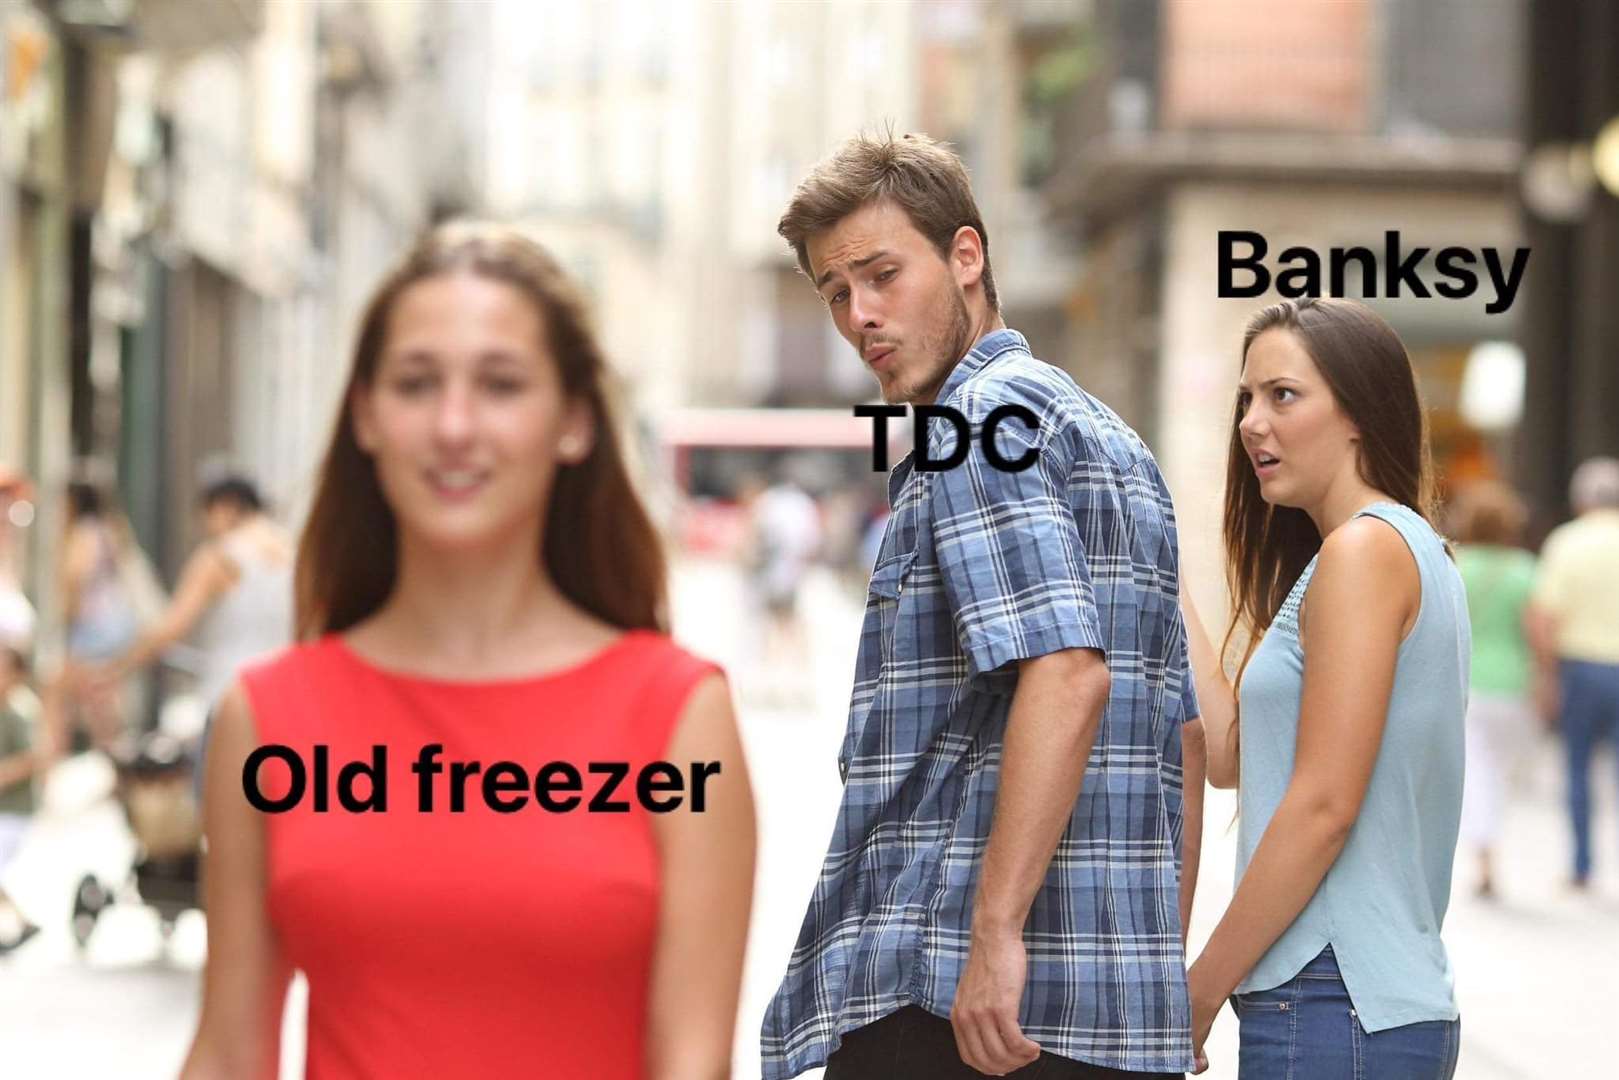 And this masterpiece was made from the classic distracted boyfriend meme. Credit: Dean Umbers